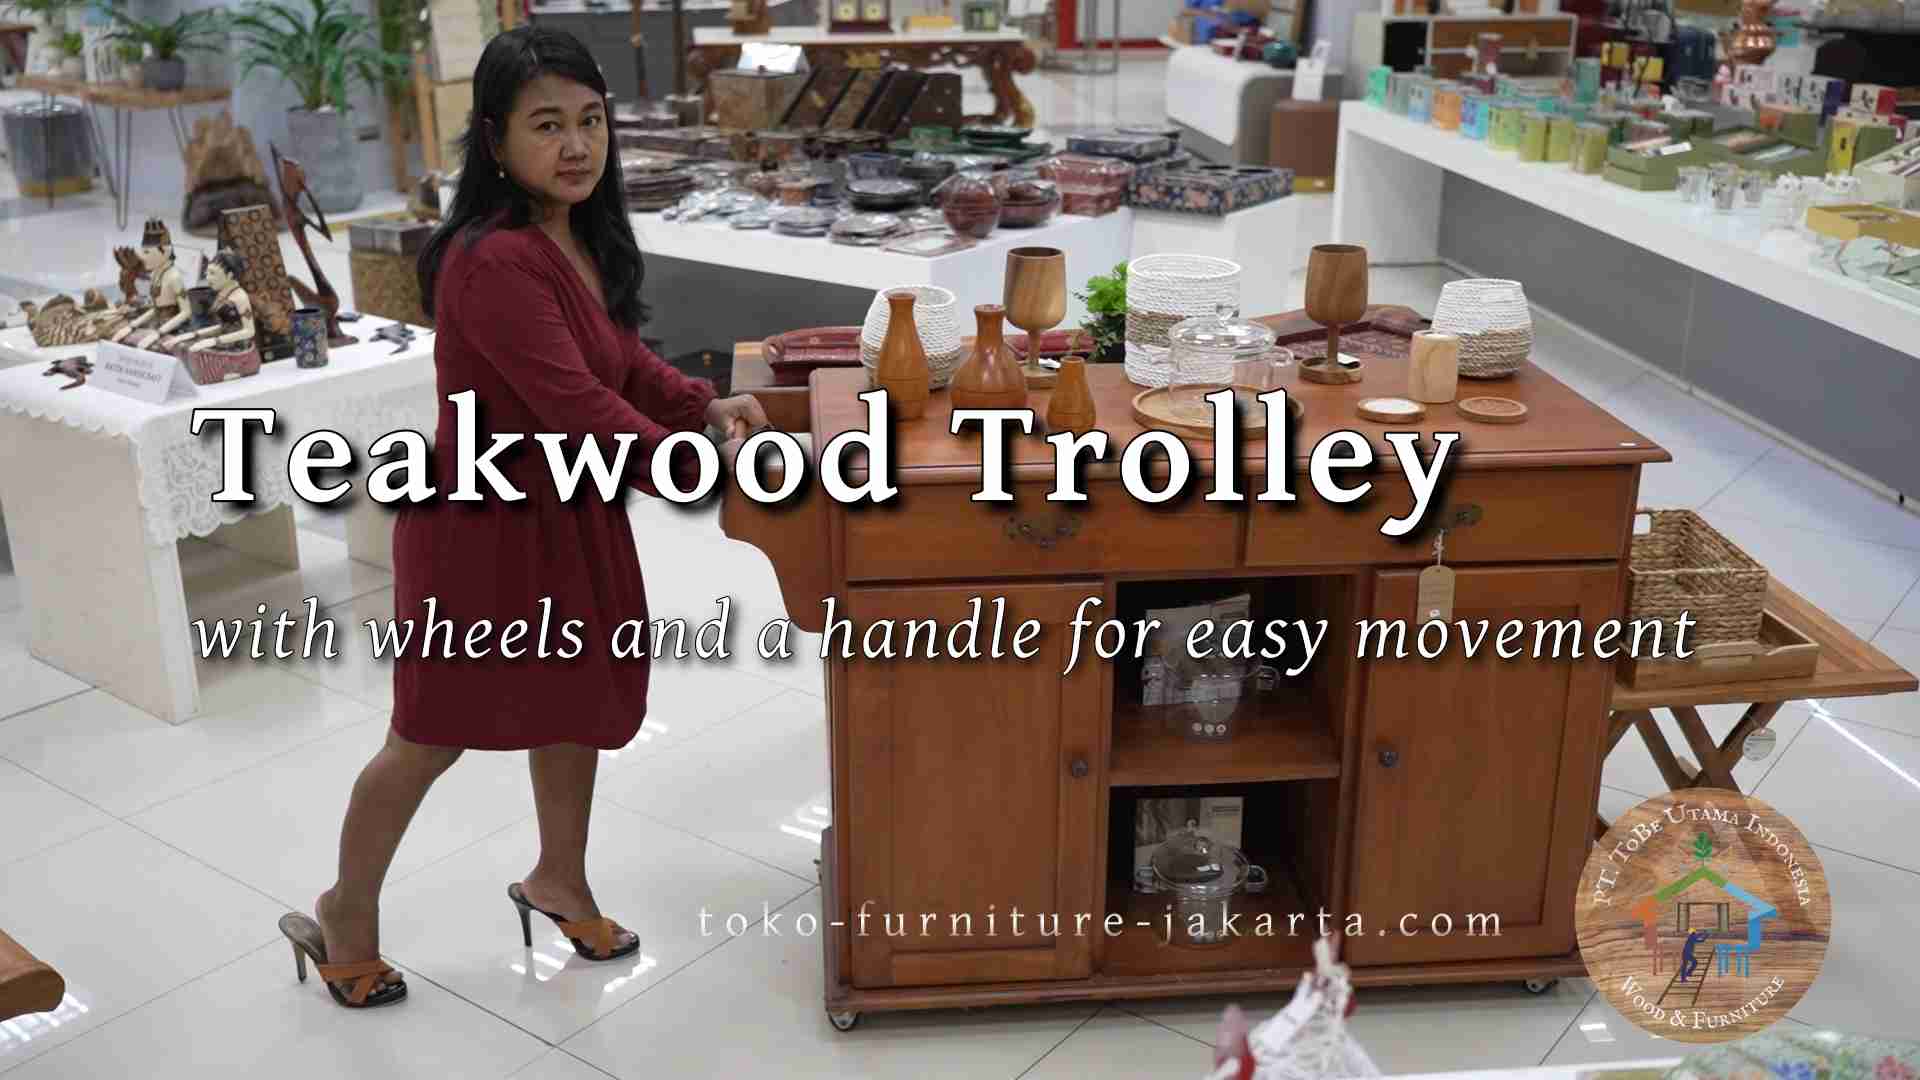 Teakwood Trolley – With Wheels and a Handle for an Easy Movement